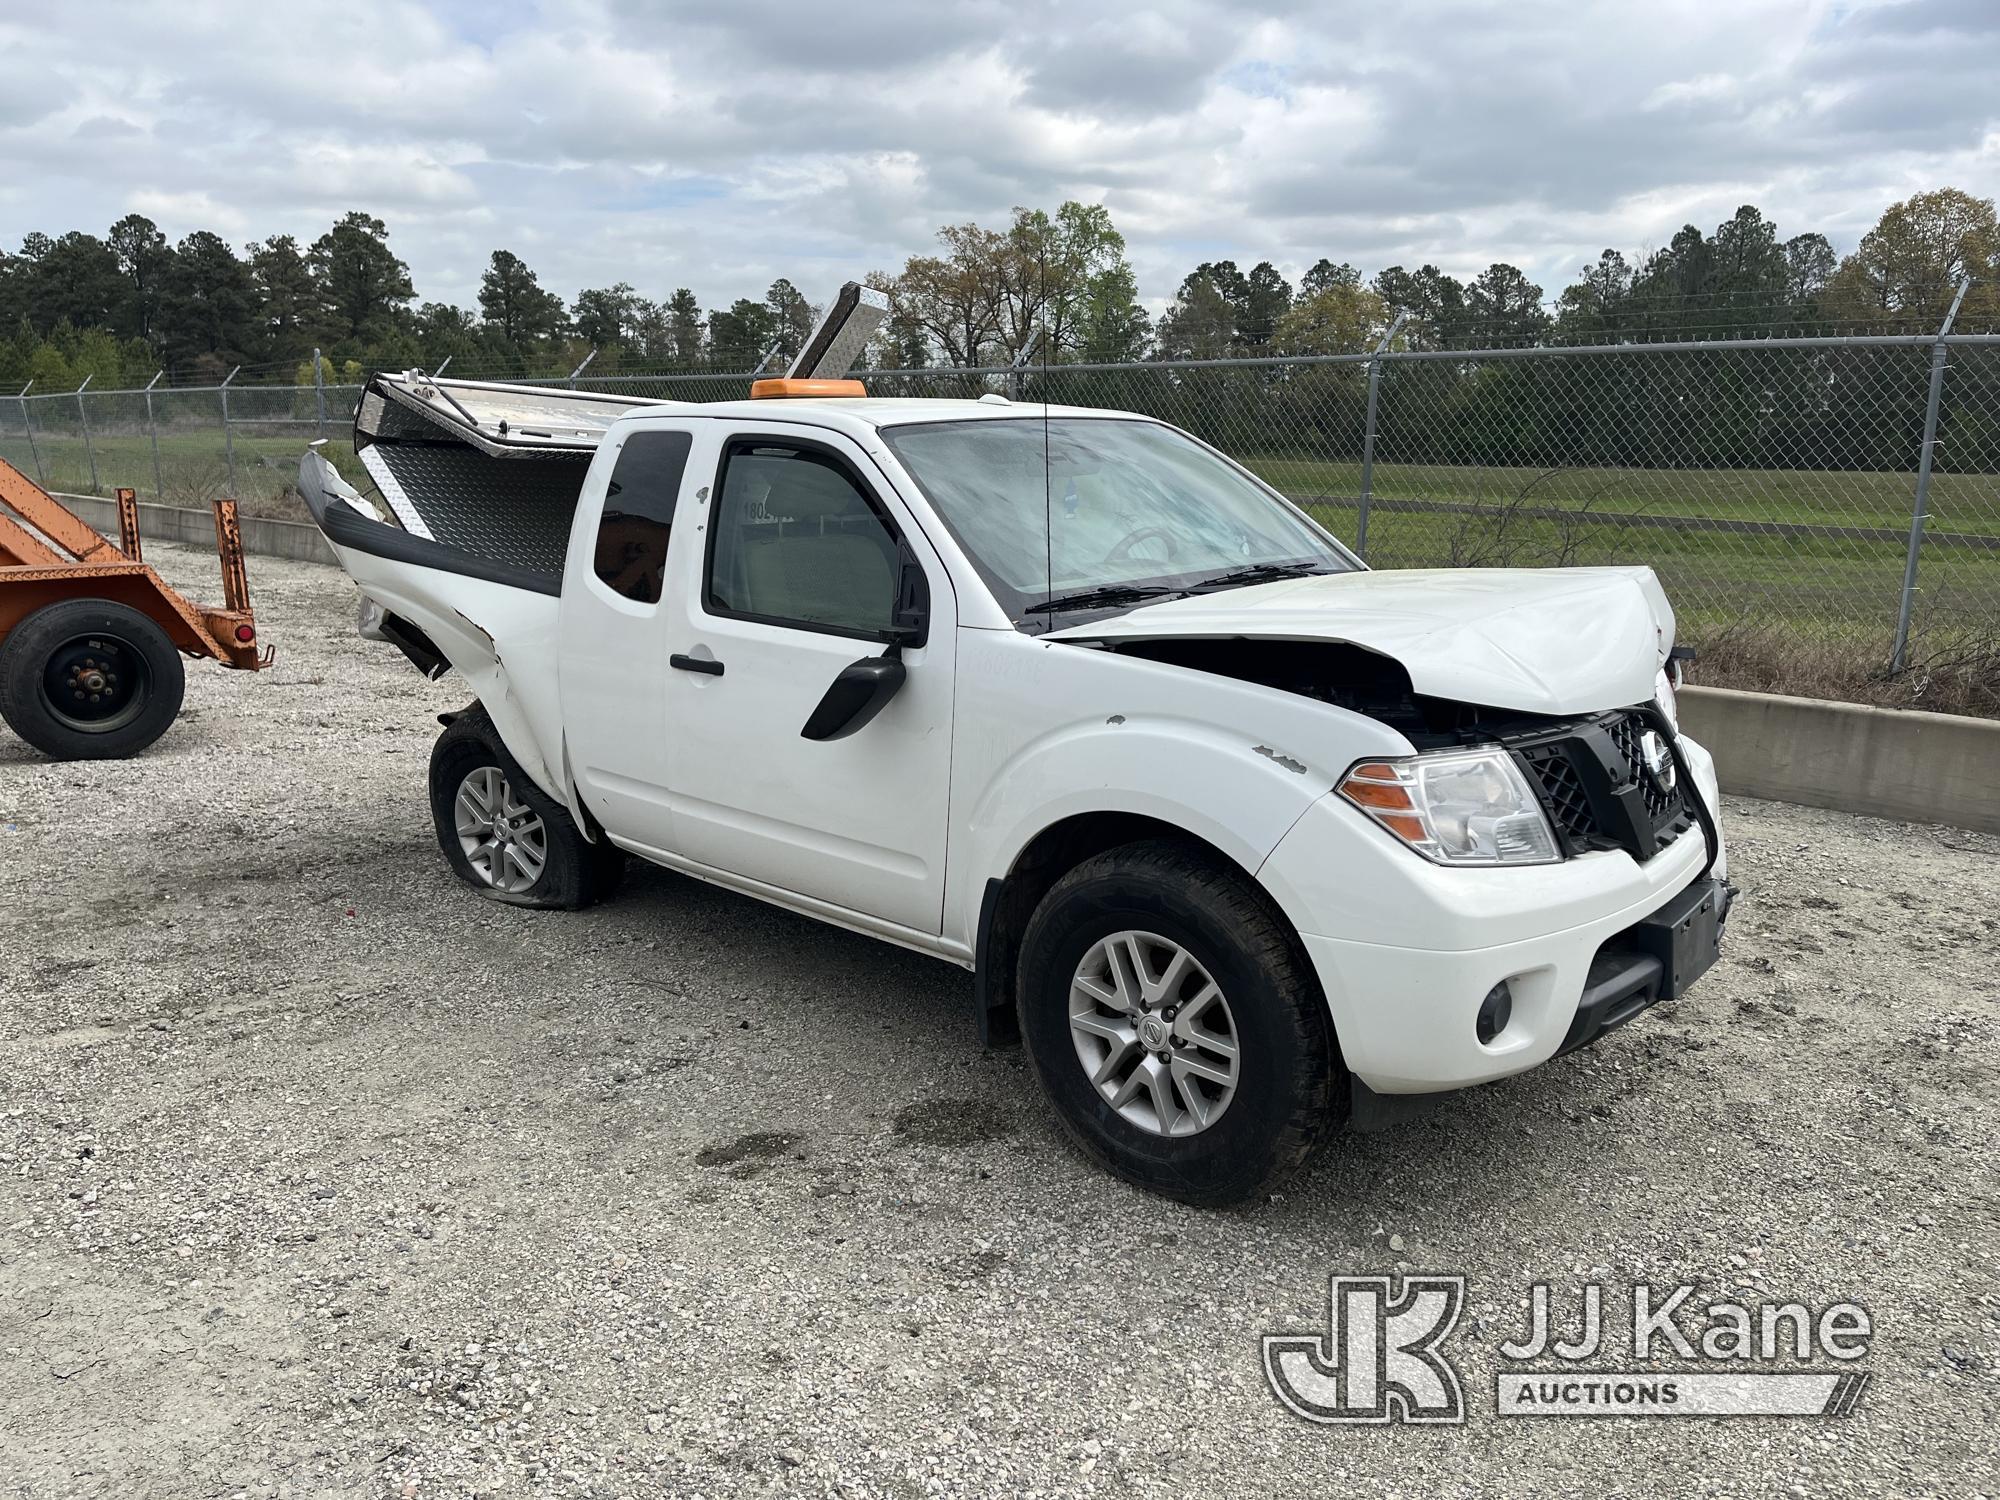 (Chester, VA) 2017 Nissan Frontier 4x4 Extended-Cab Pickup Truck Wrecked, Parts Only) (Operating Con